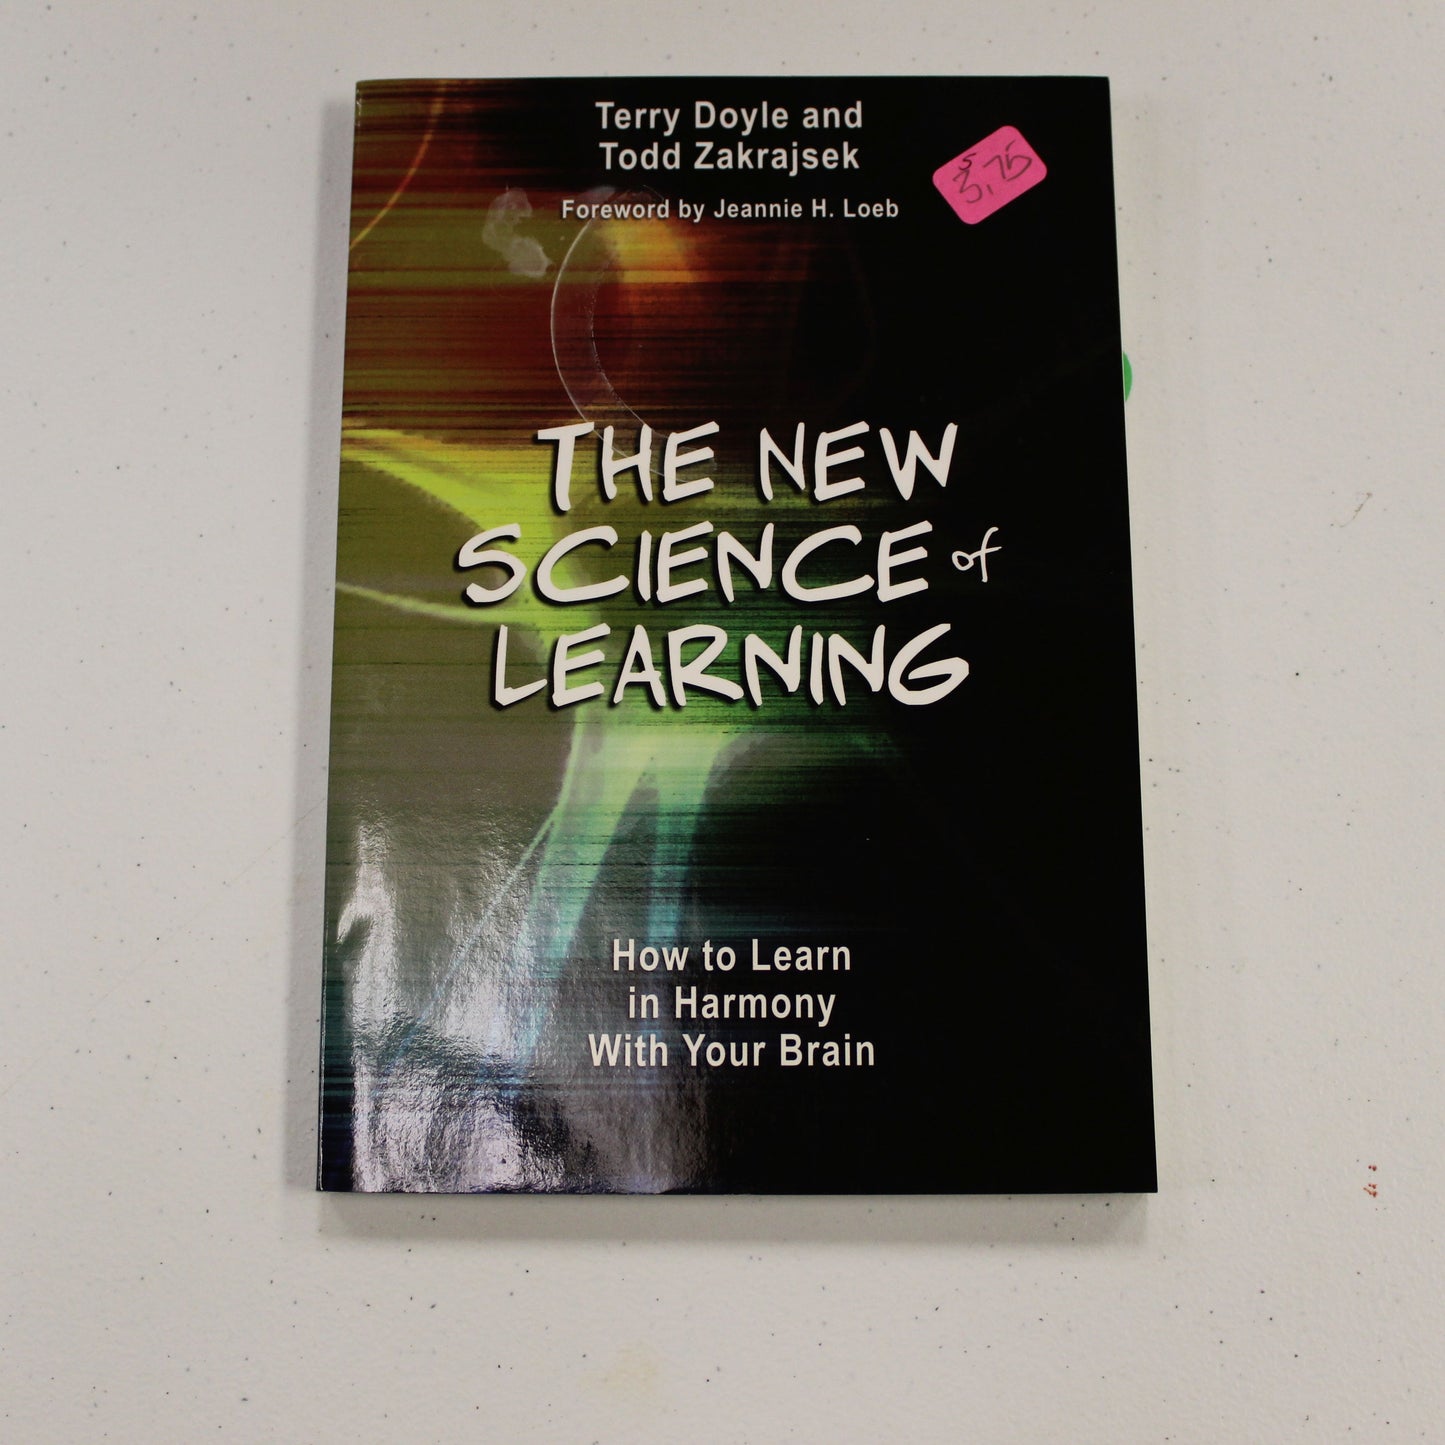 THE NEW SCIENCE OF LEARNING